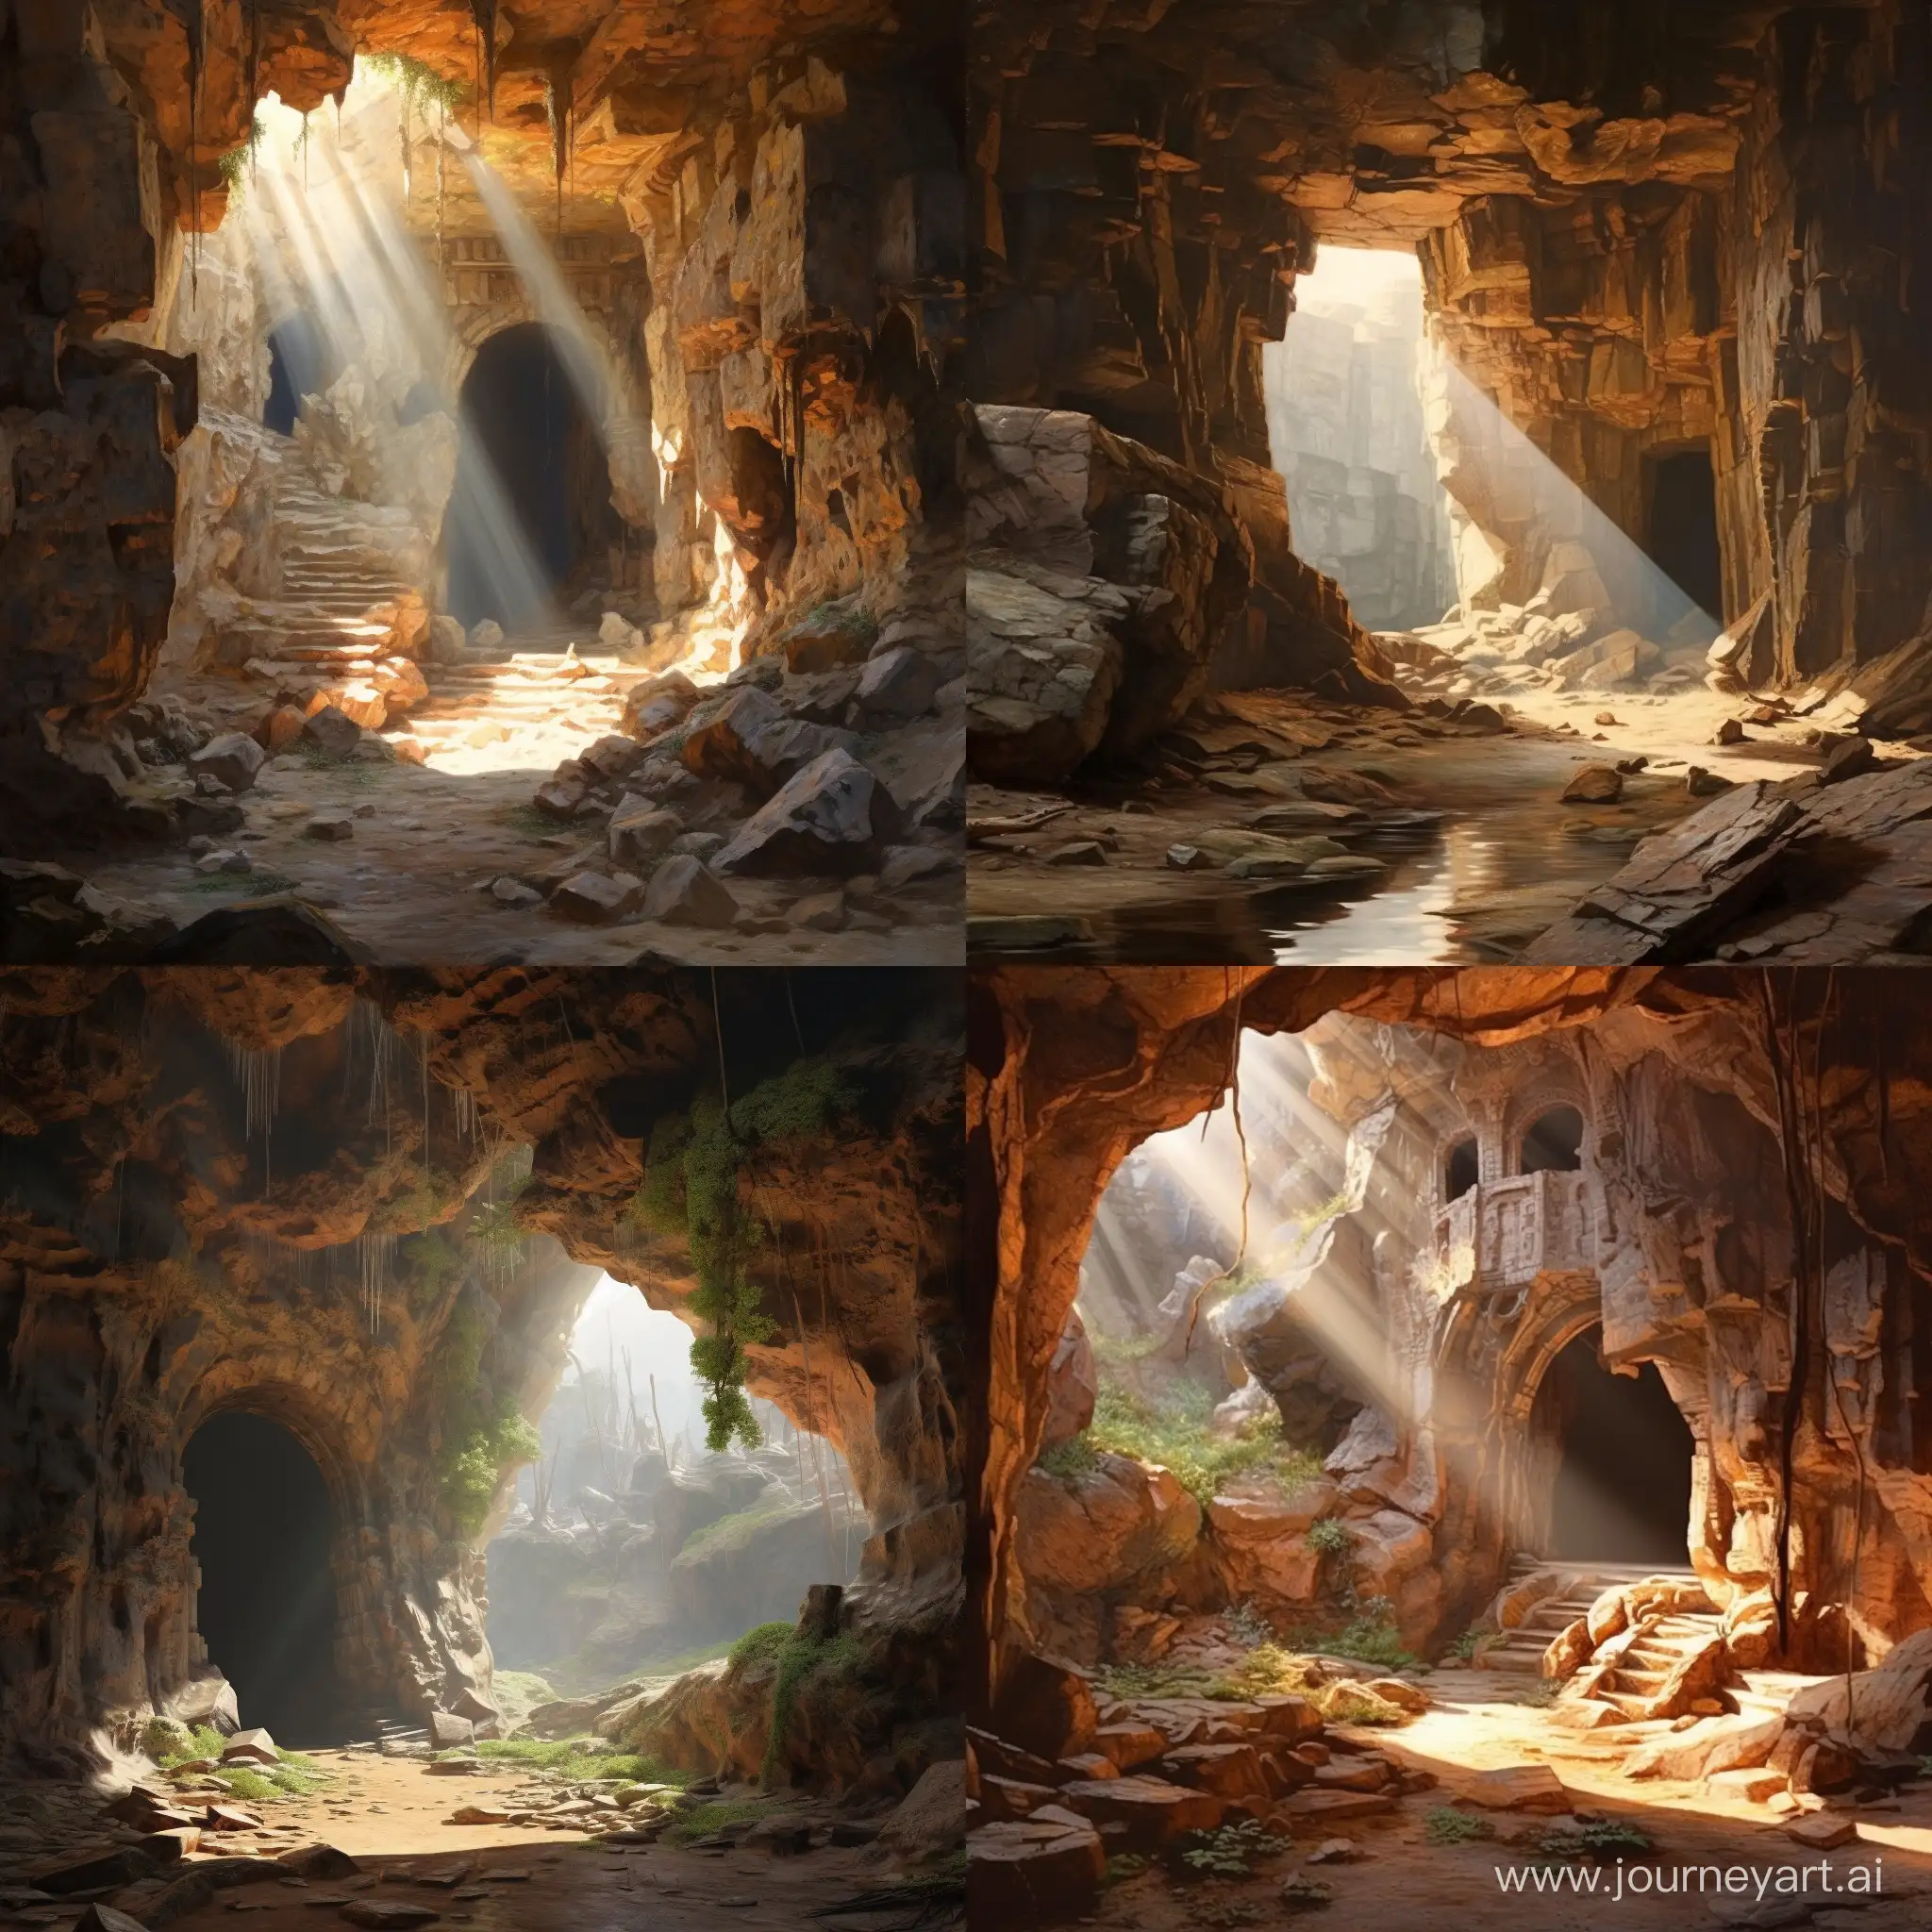 Sunlit-Ruined-Temple-Entrance-in-a-Natural-Cave